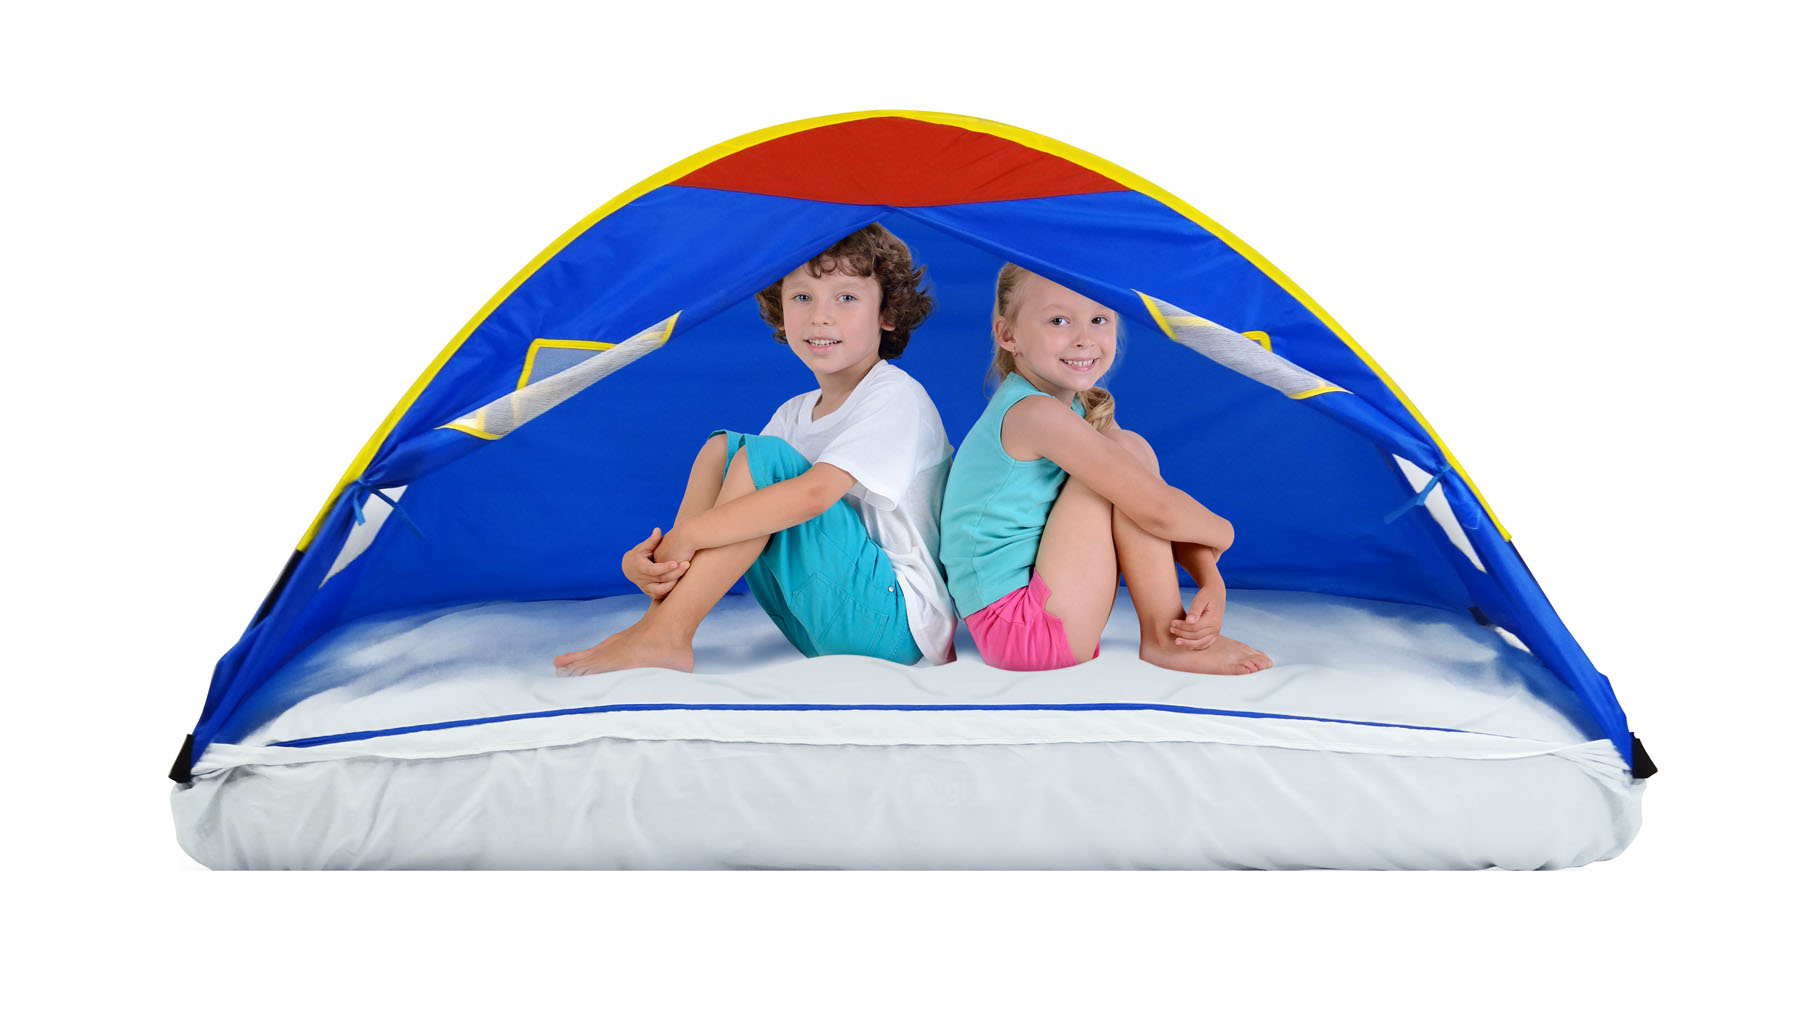 GigaTent 6 Mesh Windows Fiberglass Poles Washable Sheets Polyester Play Tent, Multi-color - image 2 of 2